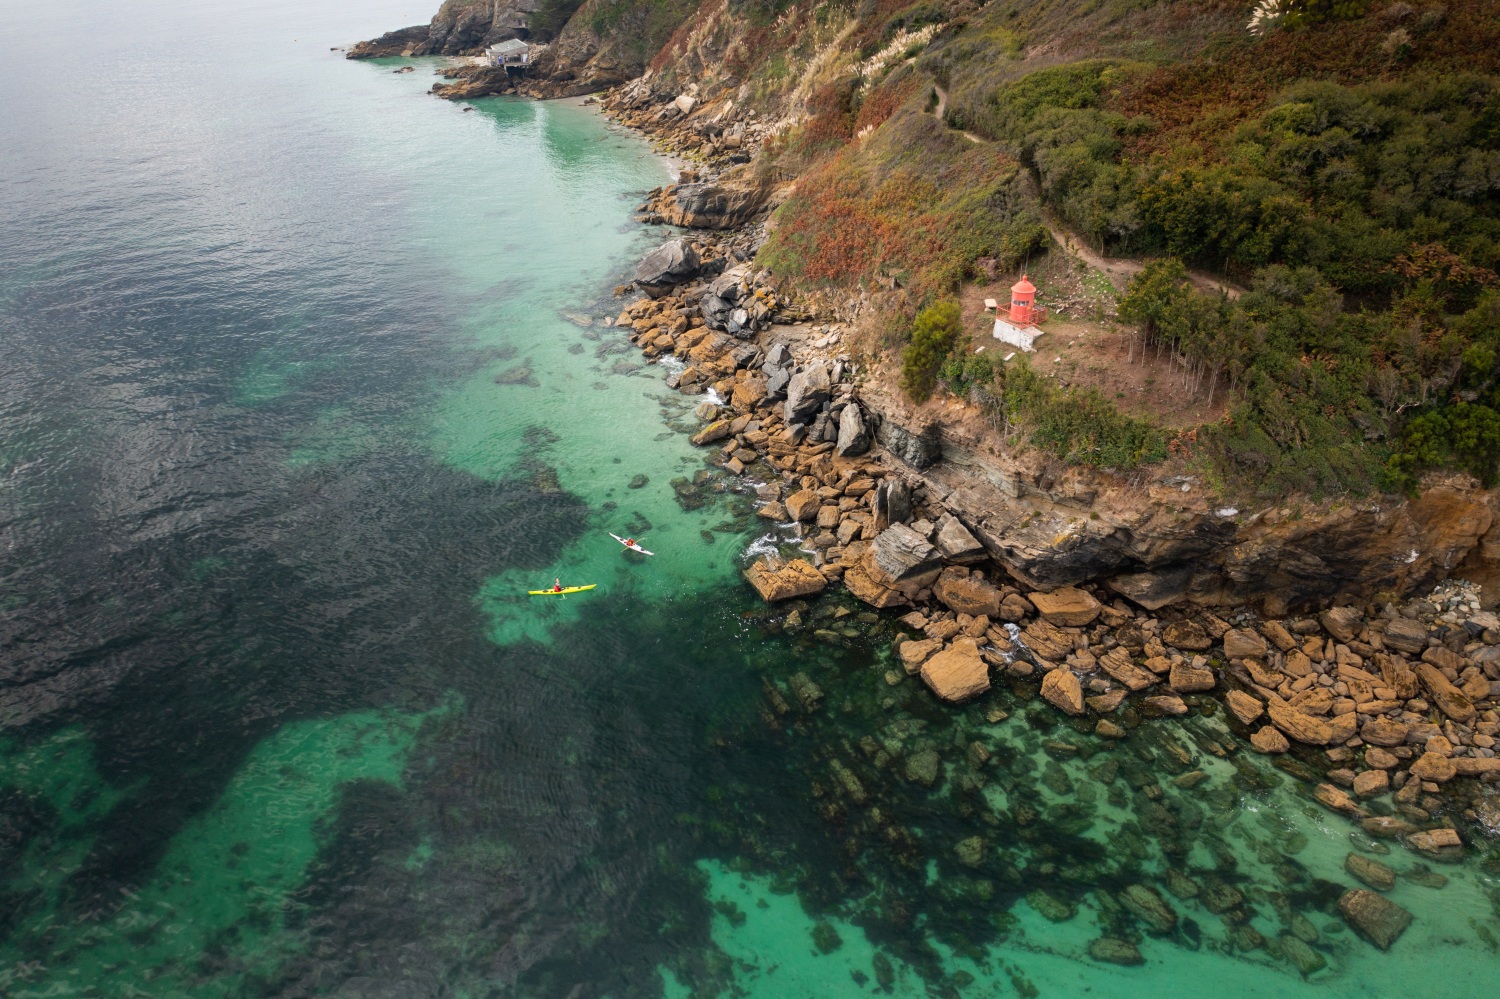 Landscape picture of people kayaking over clear waters next to rocky cliff